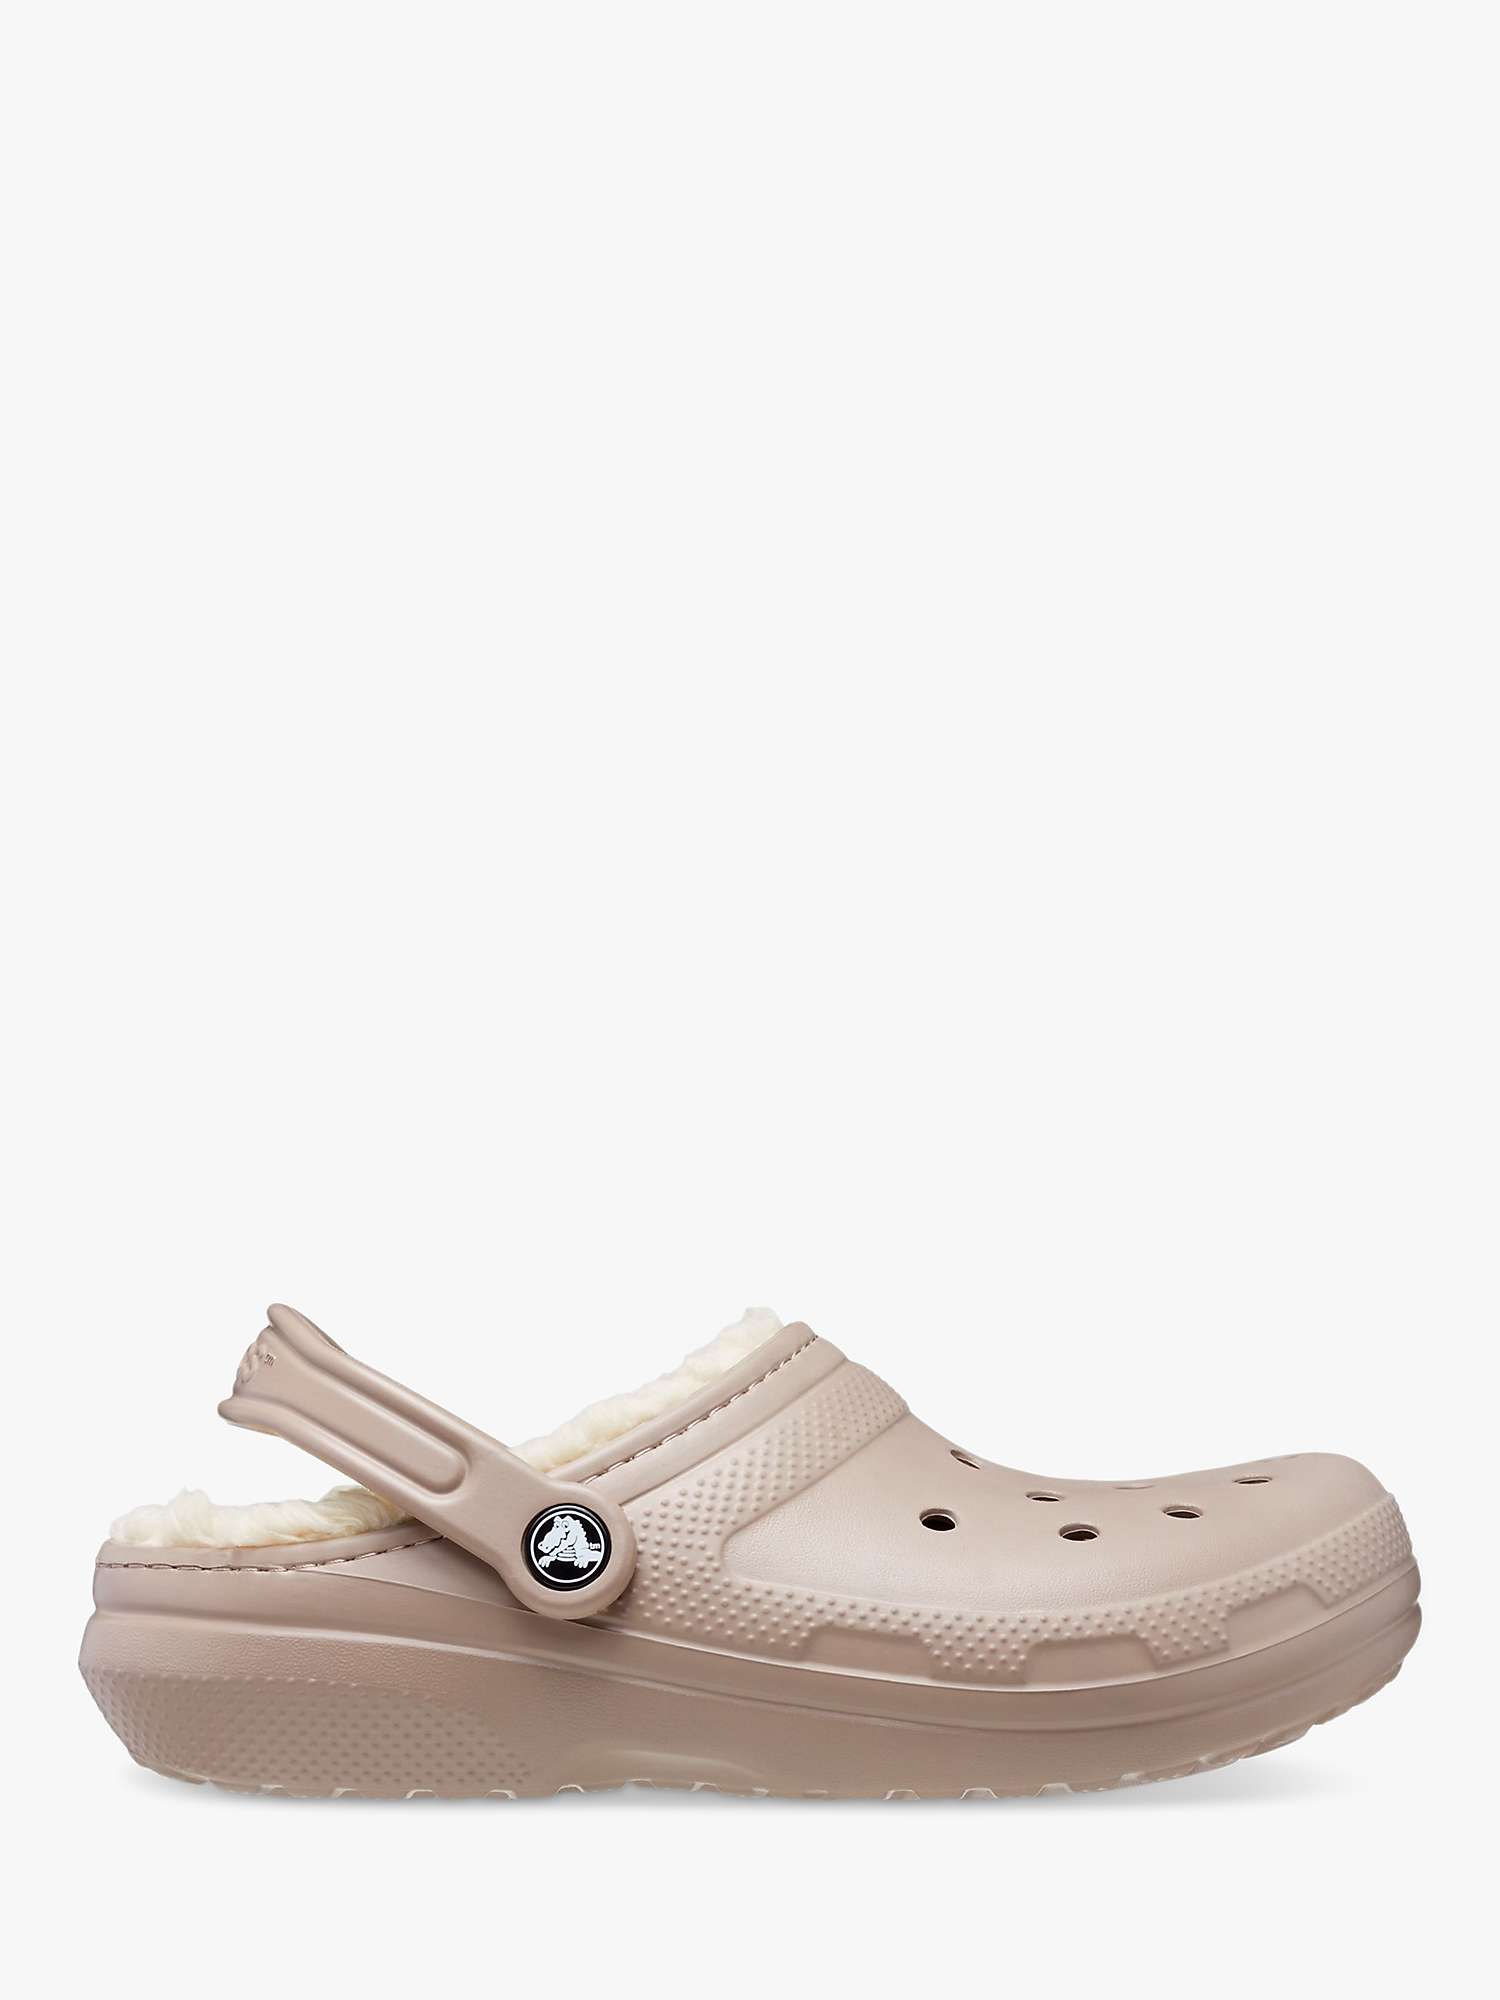 Buy Crocs Classic Lined Clogs Online at johnlewis.com